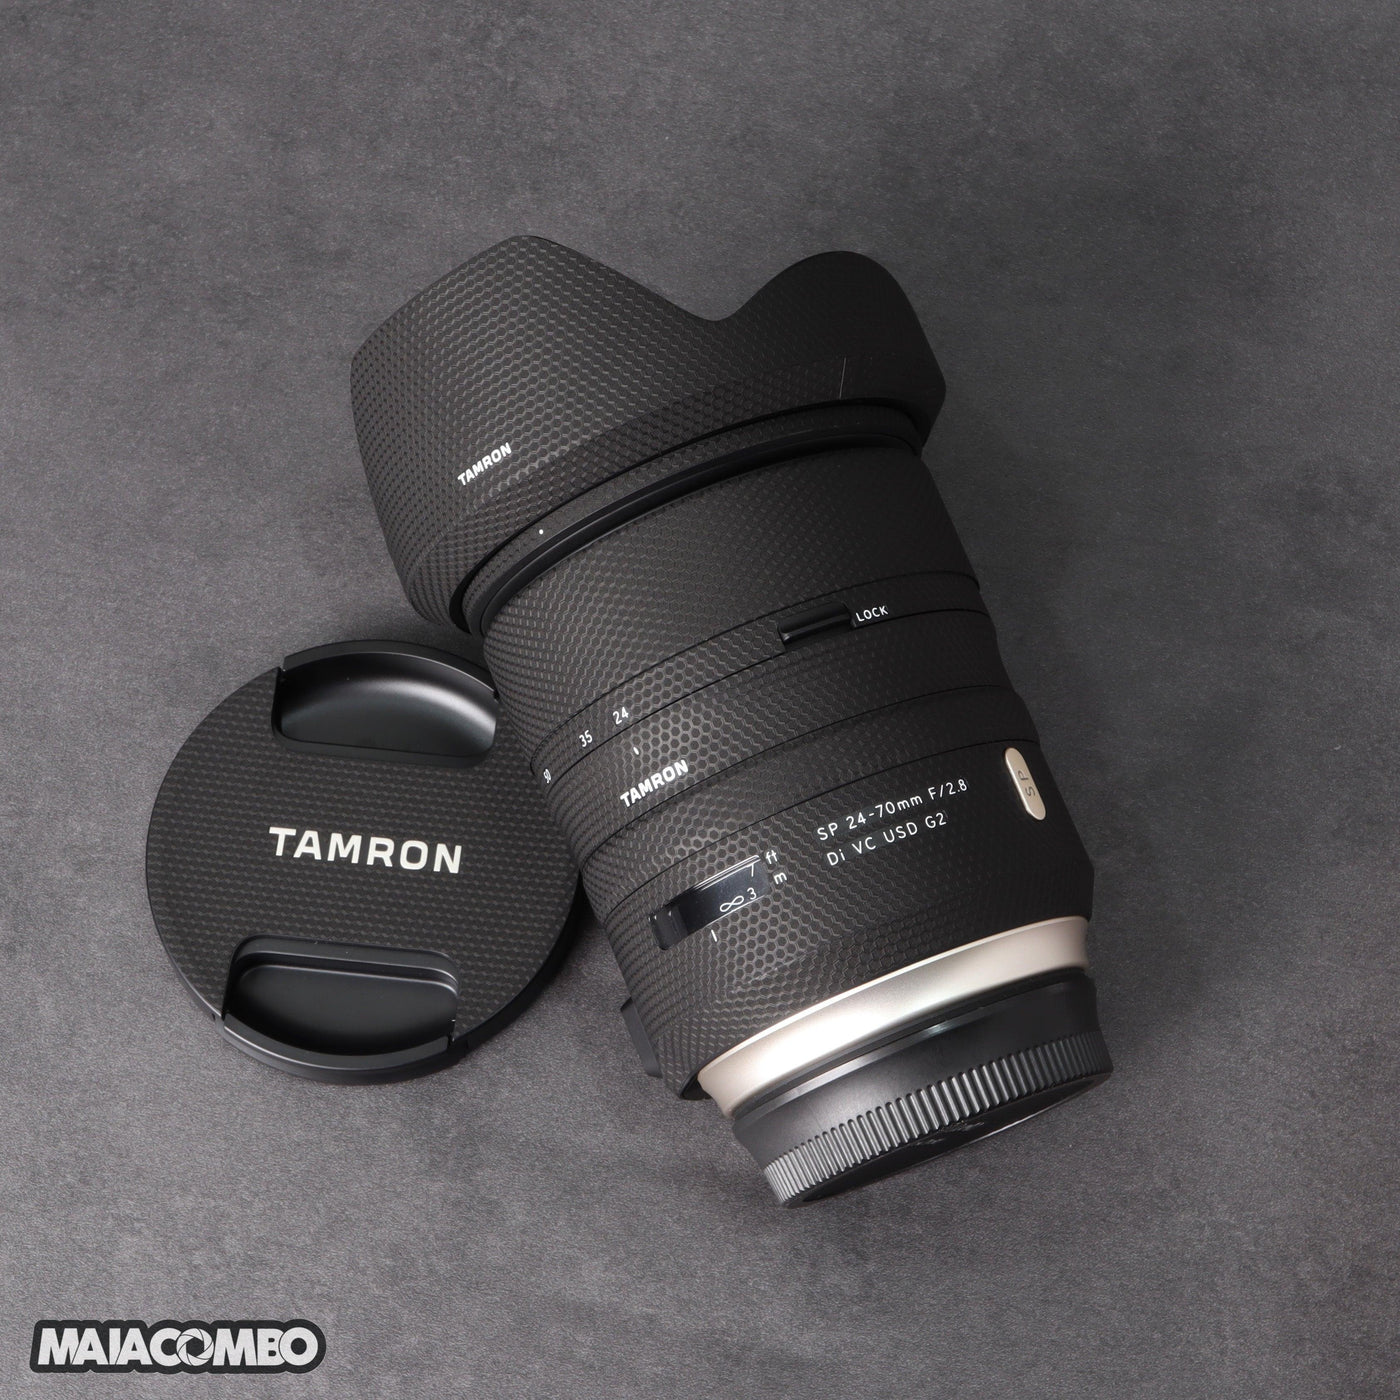 TAMRON SP 24-70mm f:2.8 Di VC USD G2 Lens Skin For CANON - MAIACOMBO